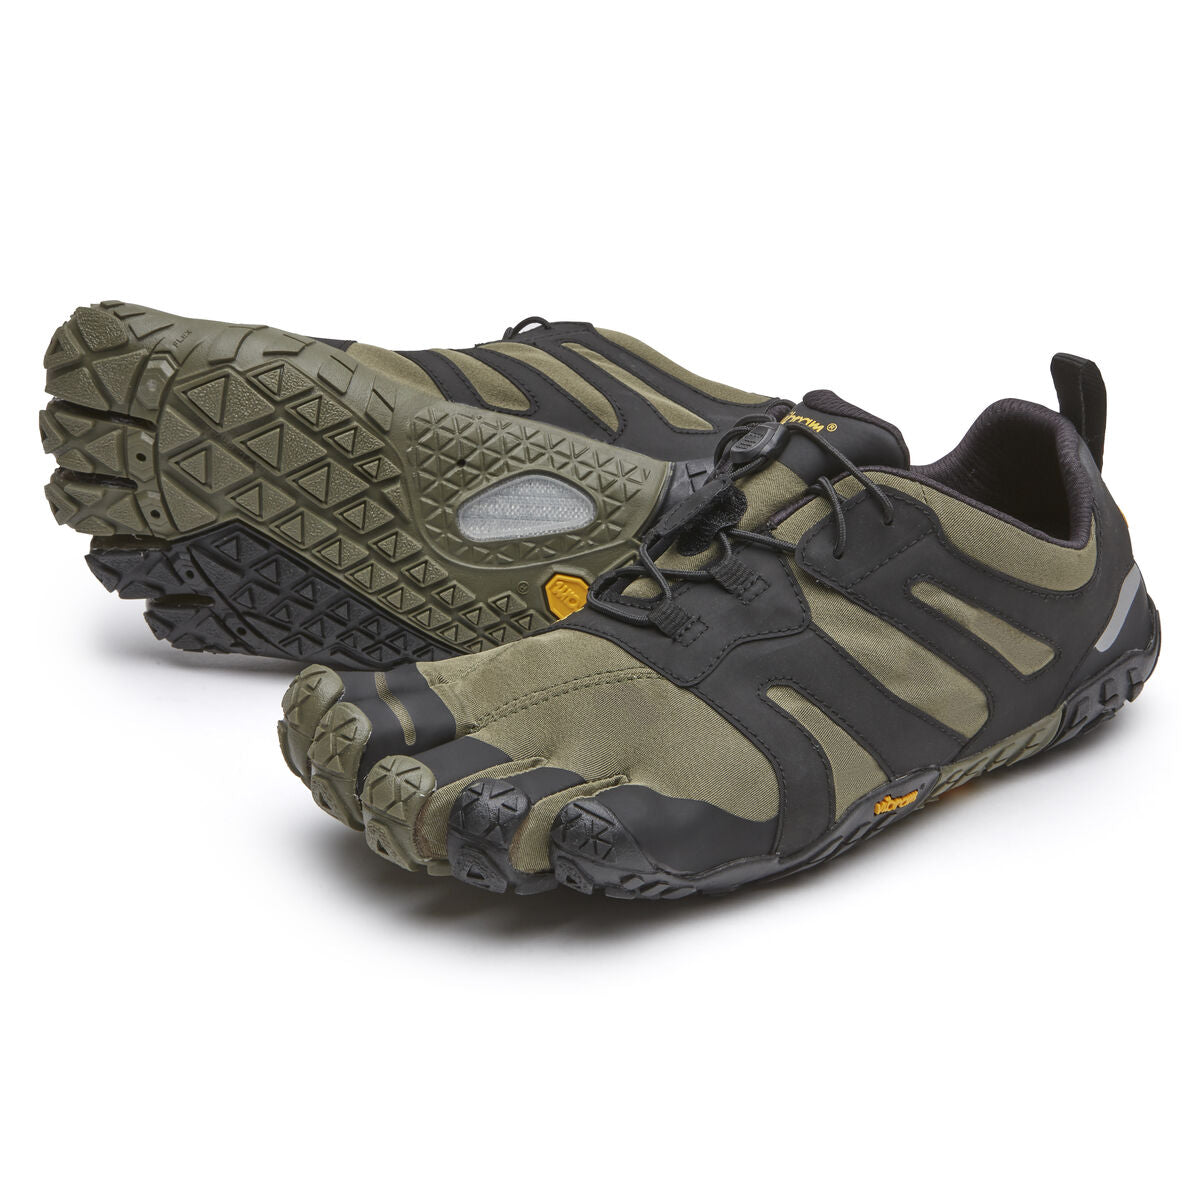 Men's Vibram Five Fingers V-Trail 2.0 Running Shoe in Ivy/Black from the front